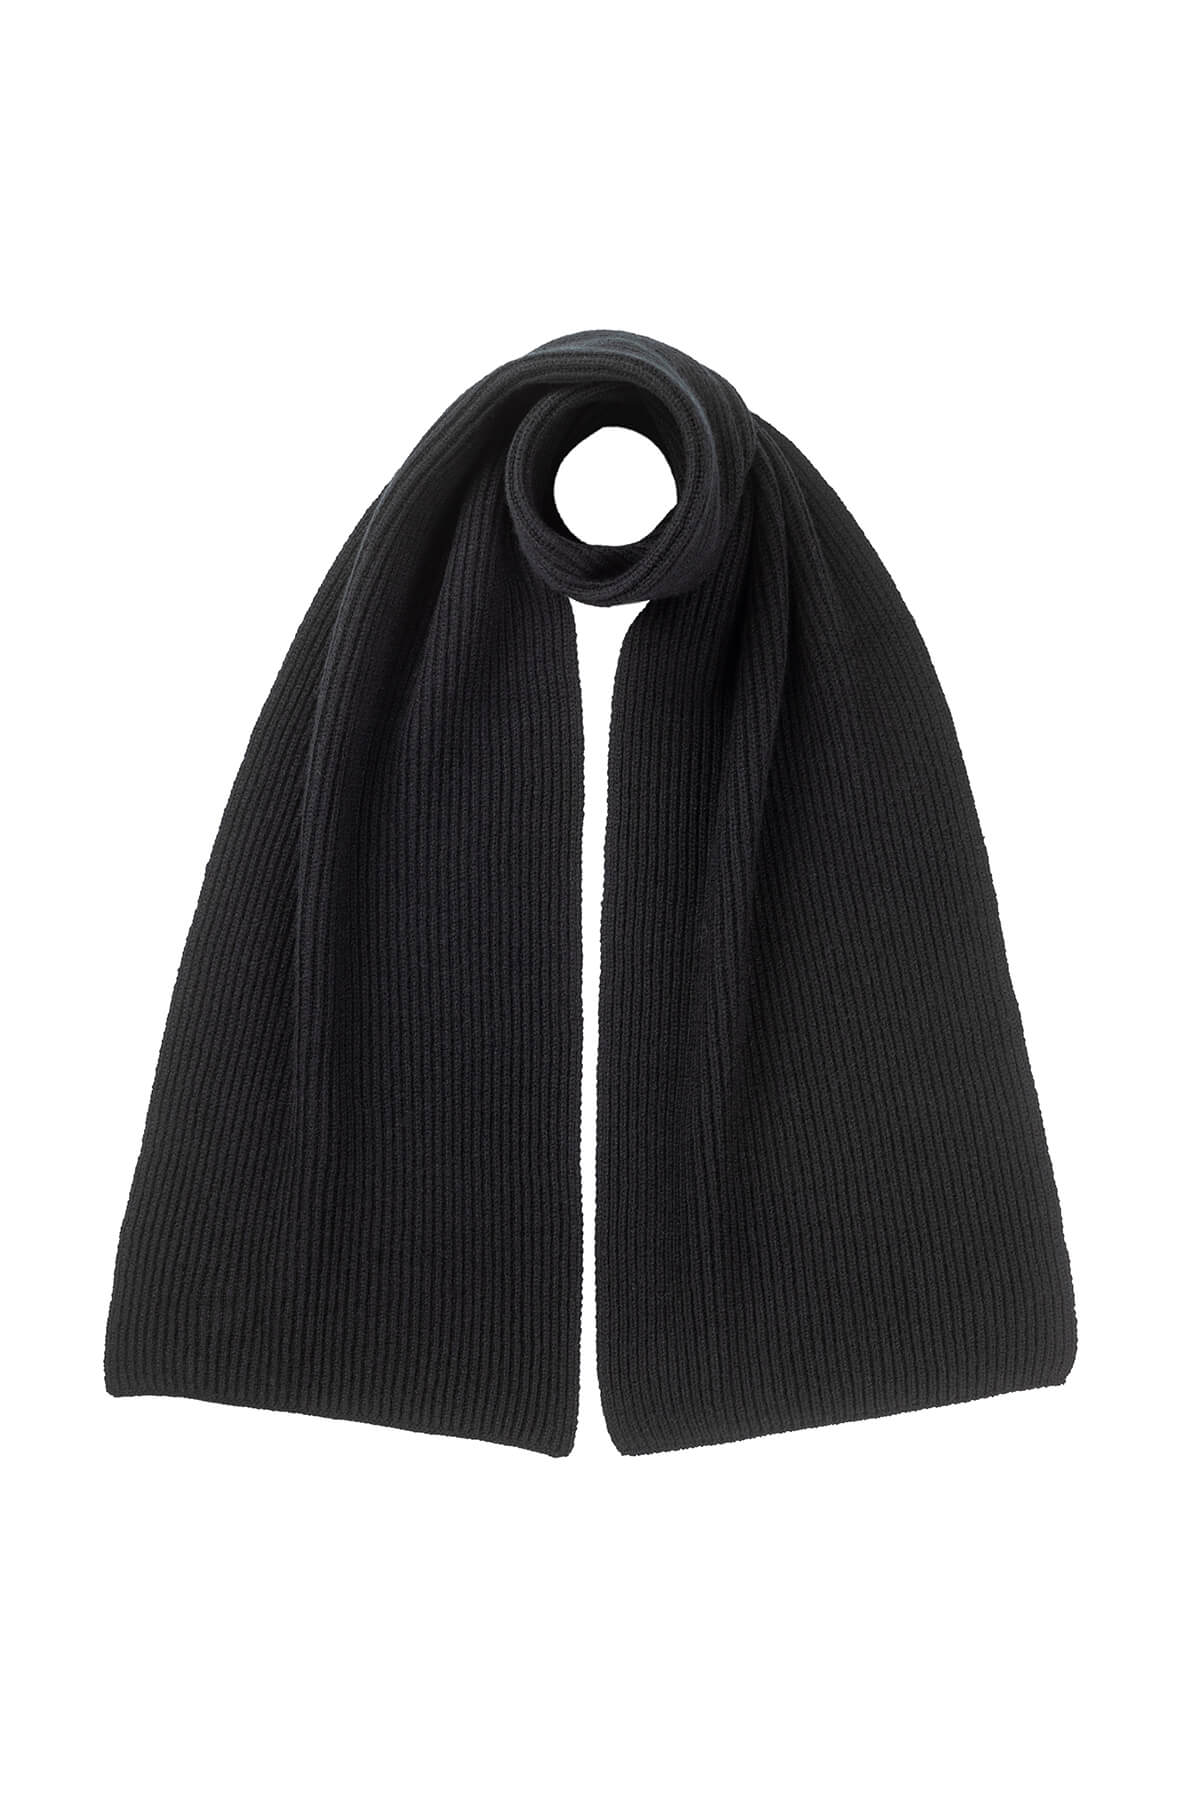 Johnstons of Elgin’s Ribbed Cashmere Scarf Giftset in Black on a white background AW23GIFTSET6A